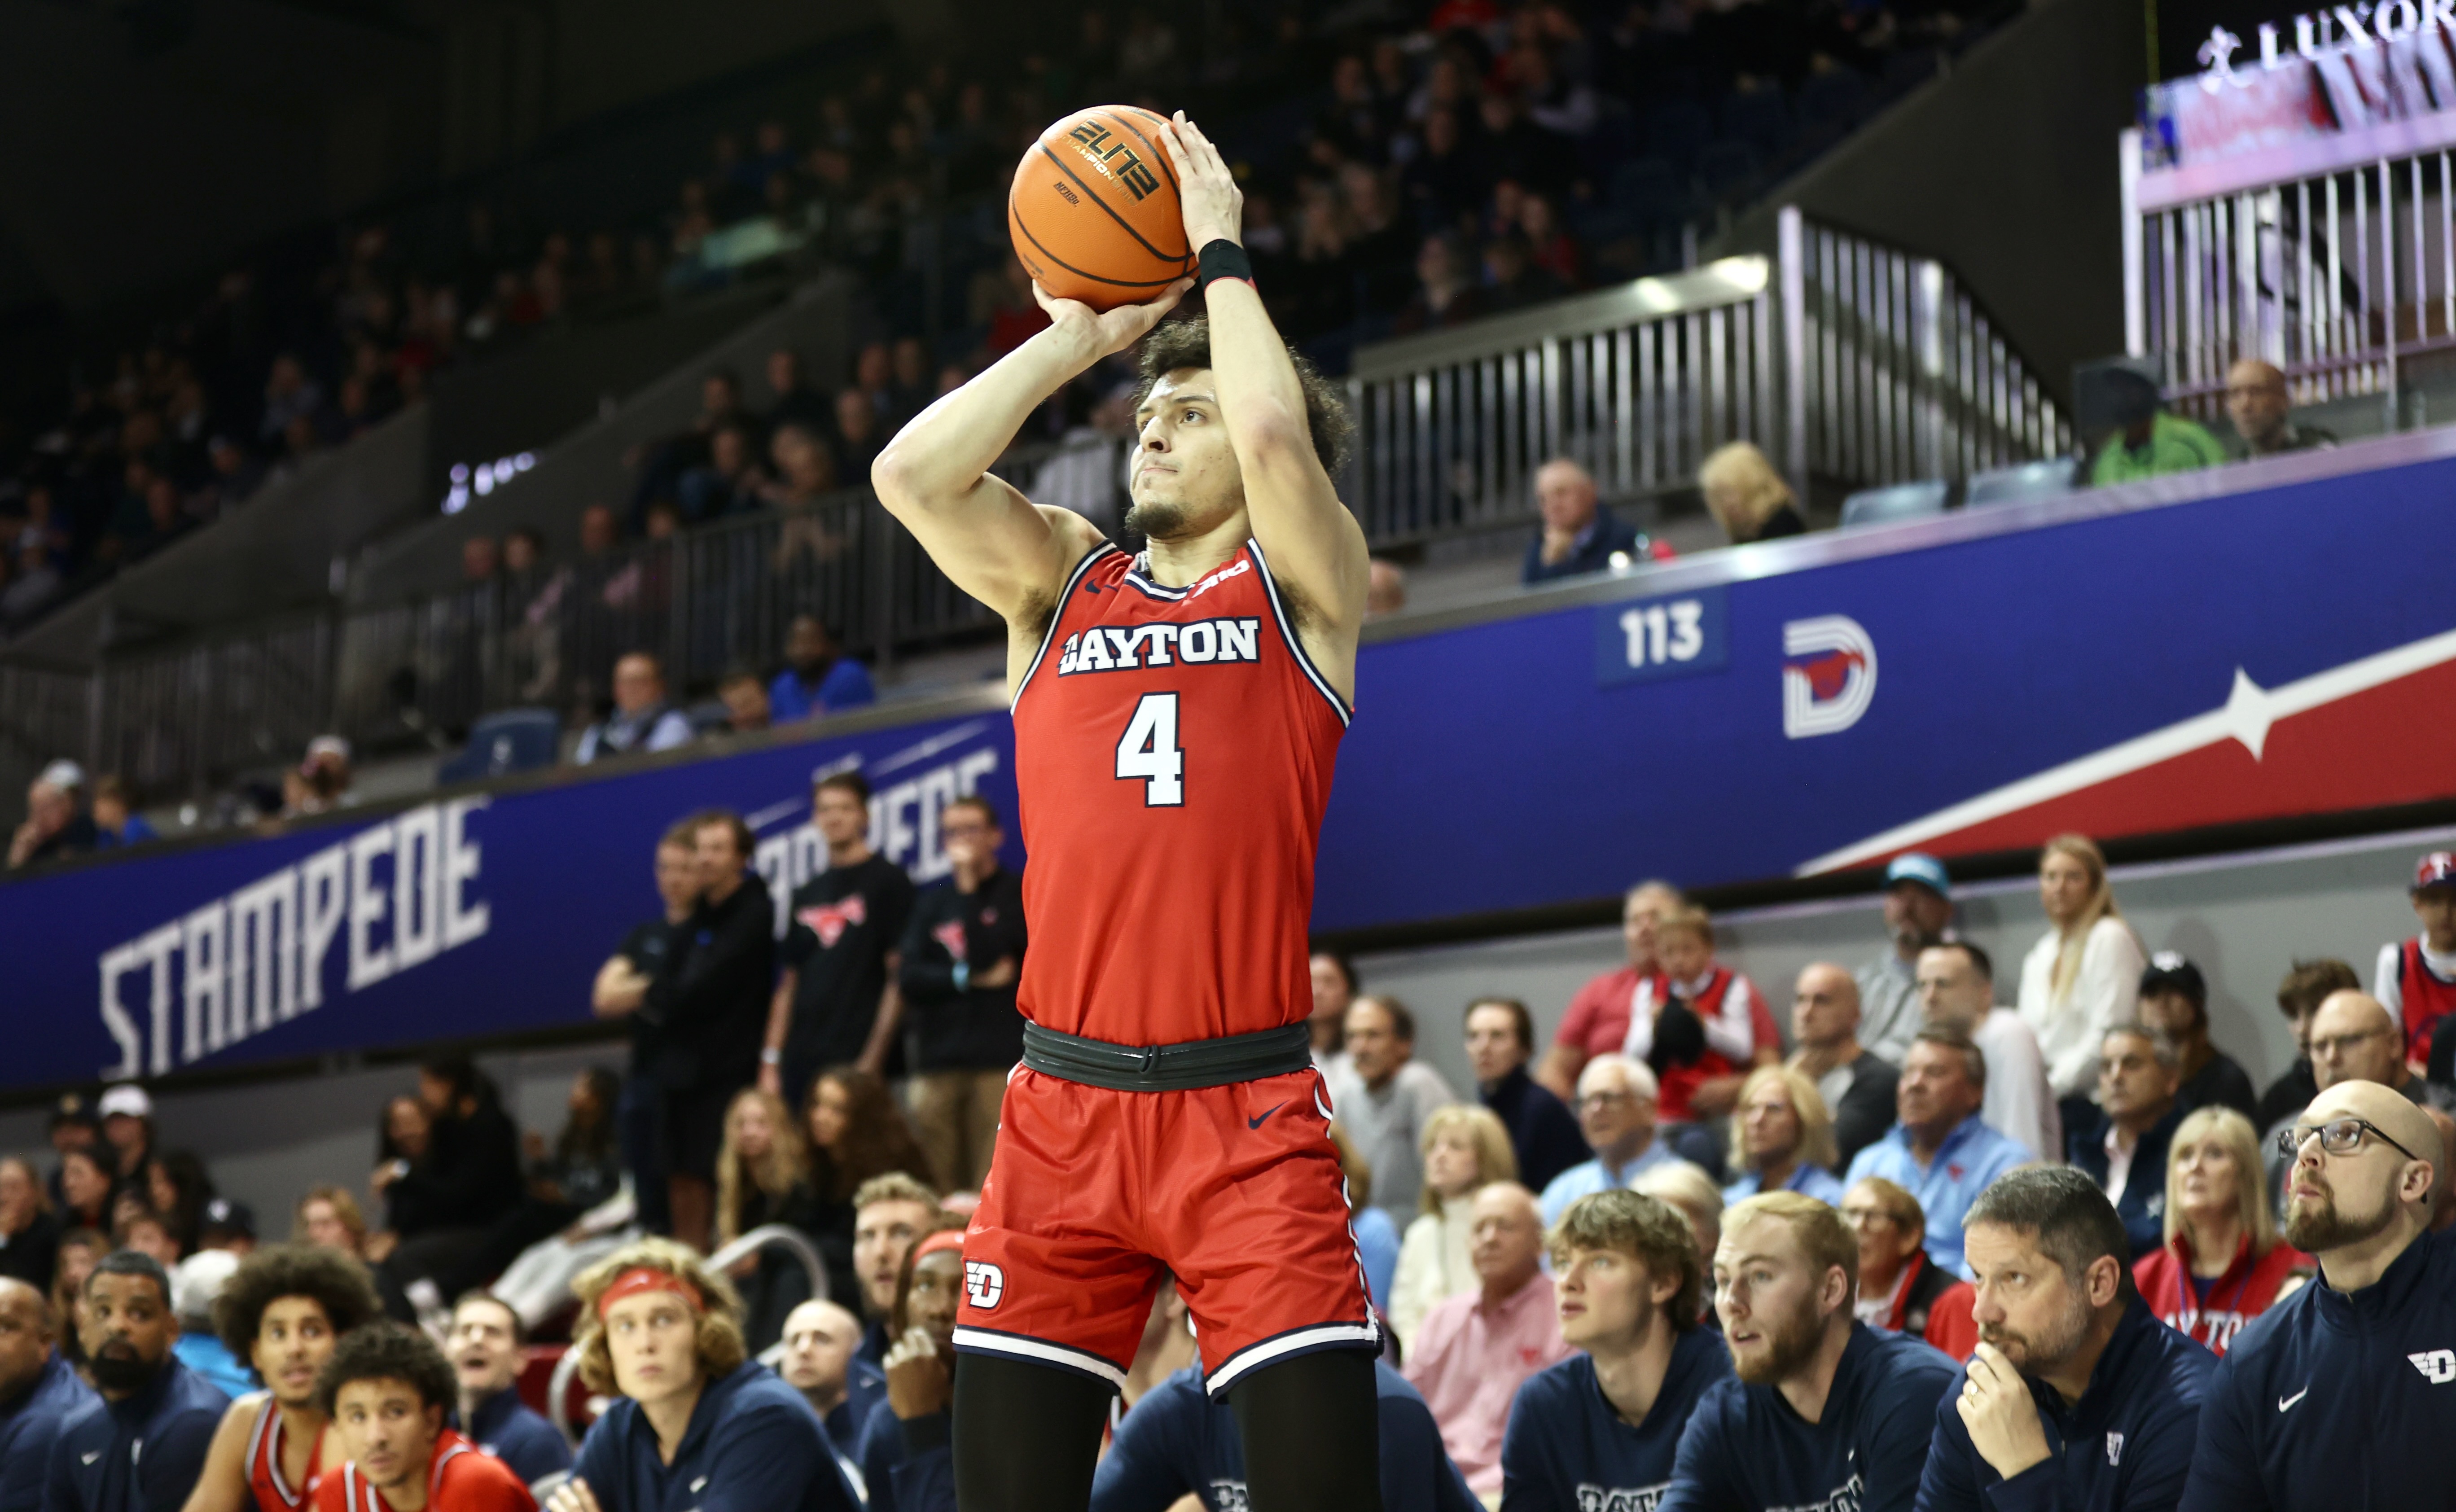 Koby Brea thriving in his fourth season with Dayton Flyers